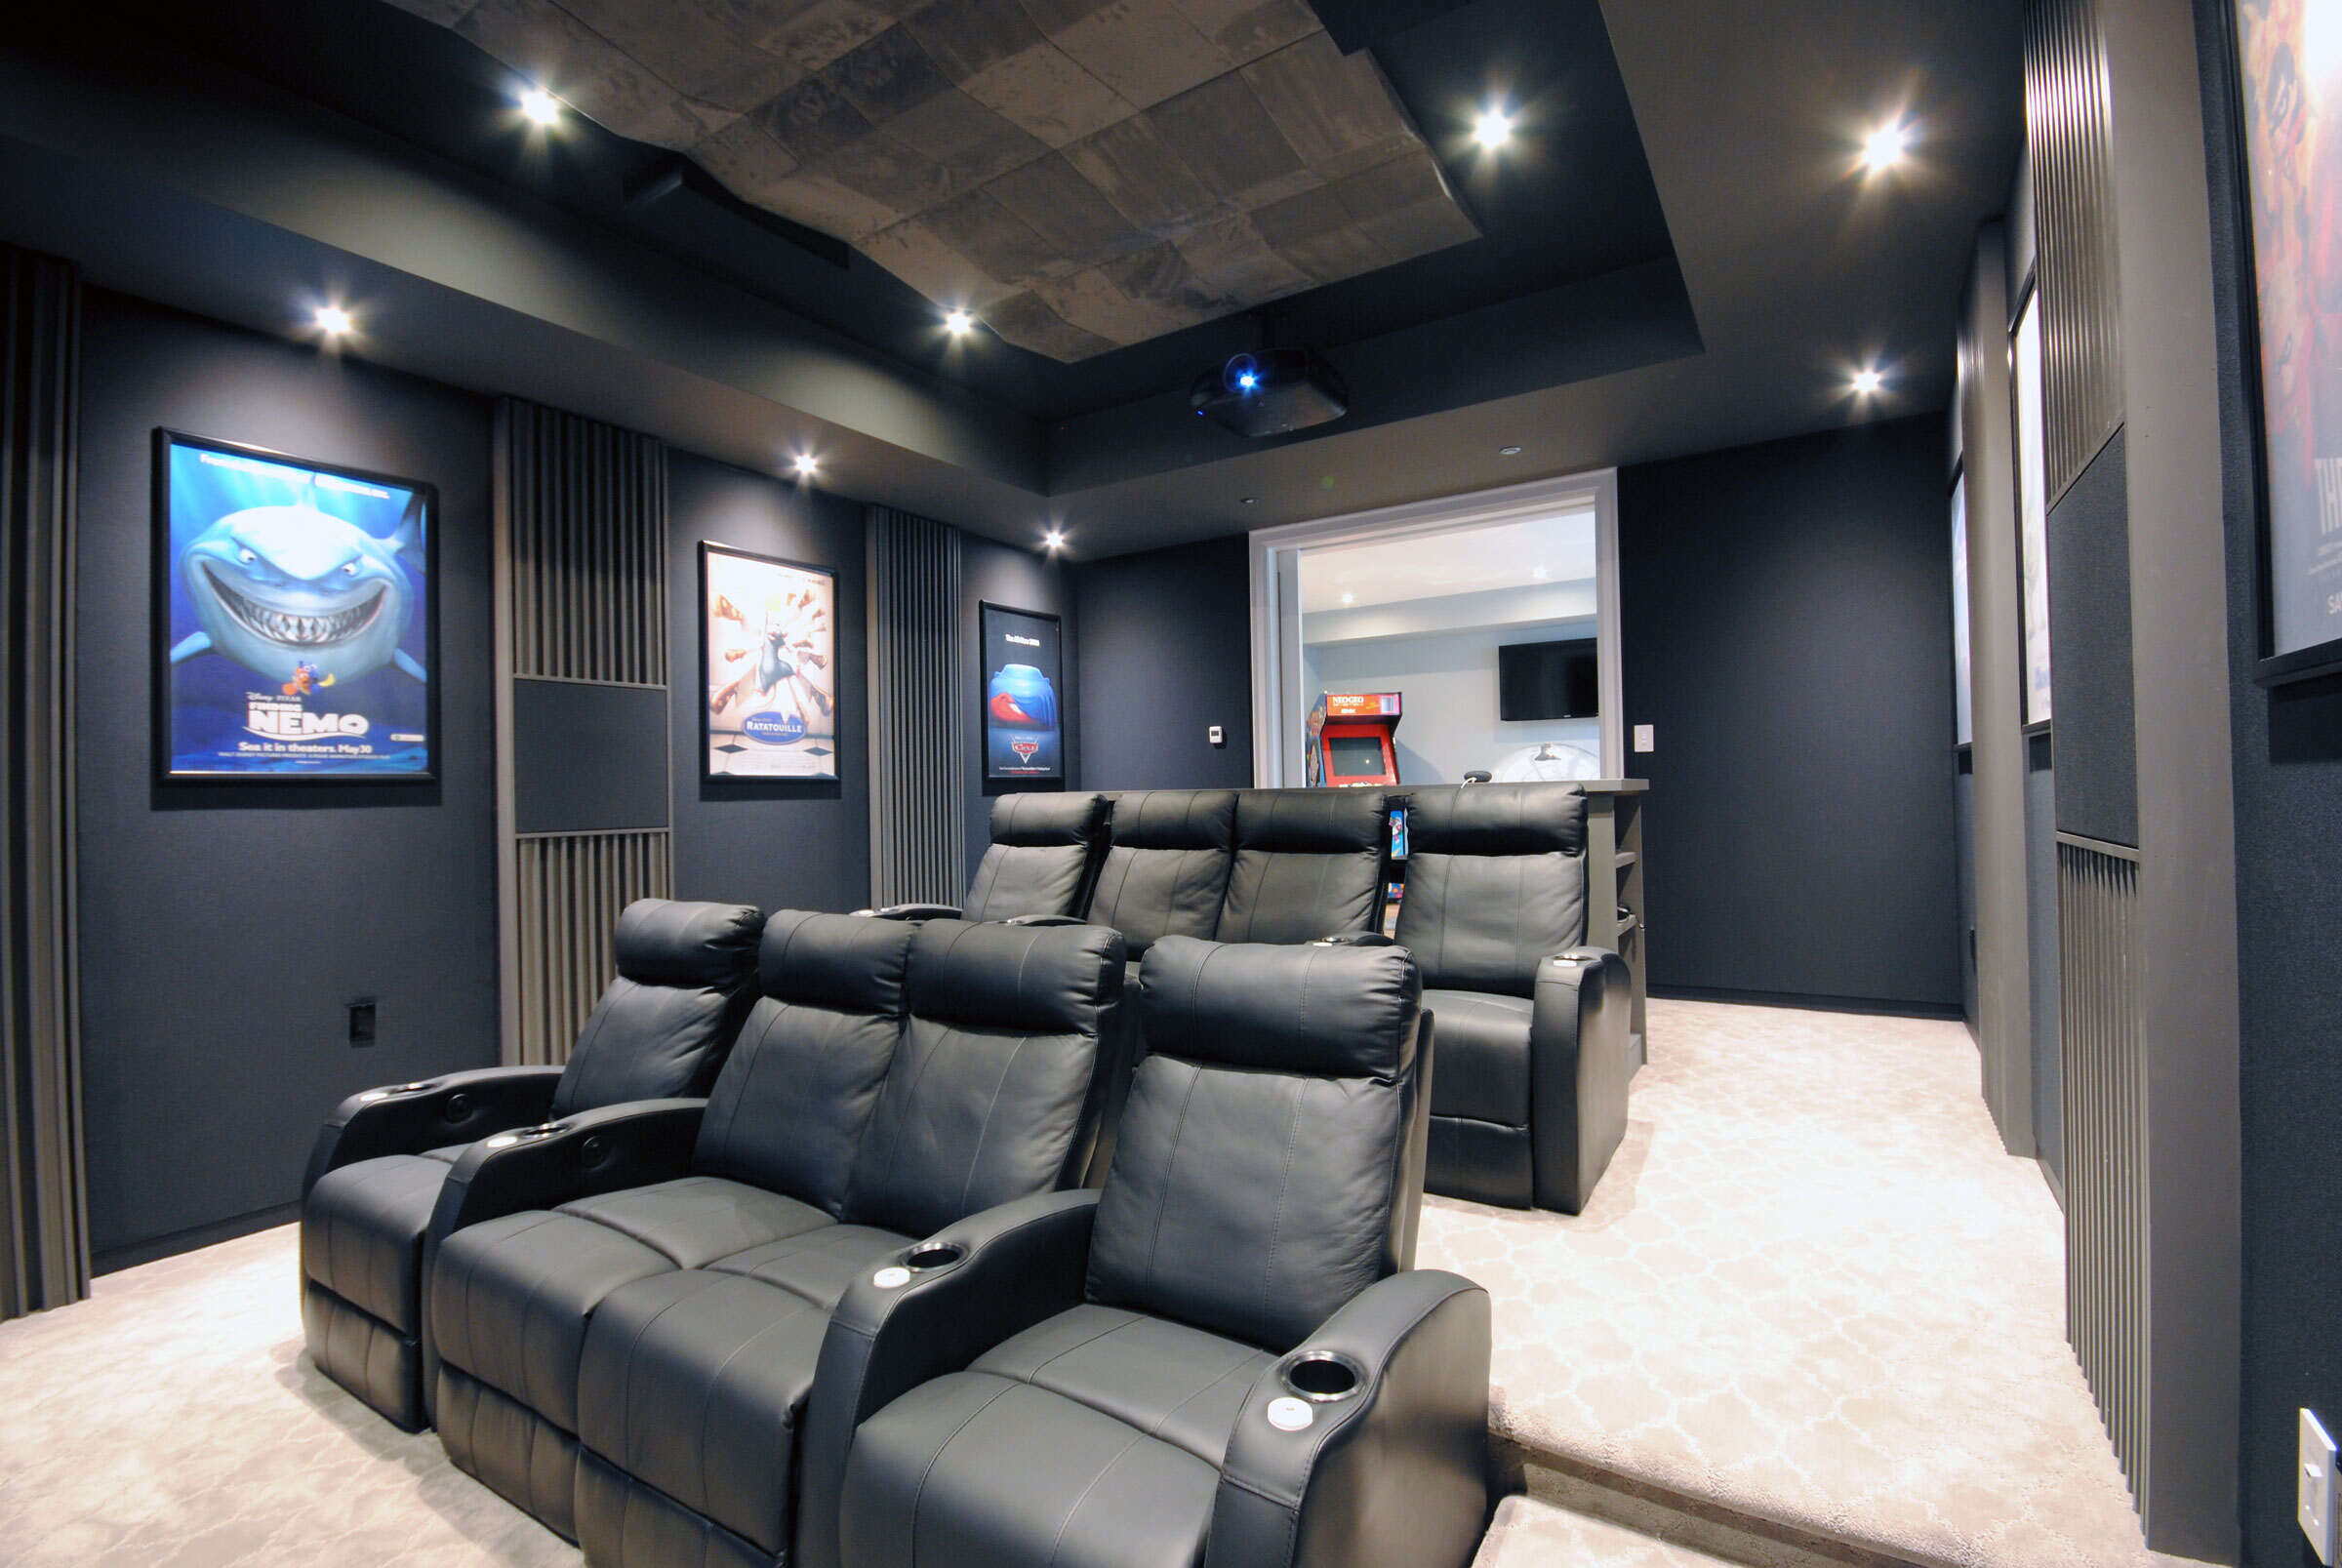 Where To Put Acoustic Panels In A Home Theater